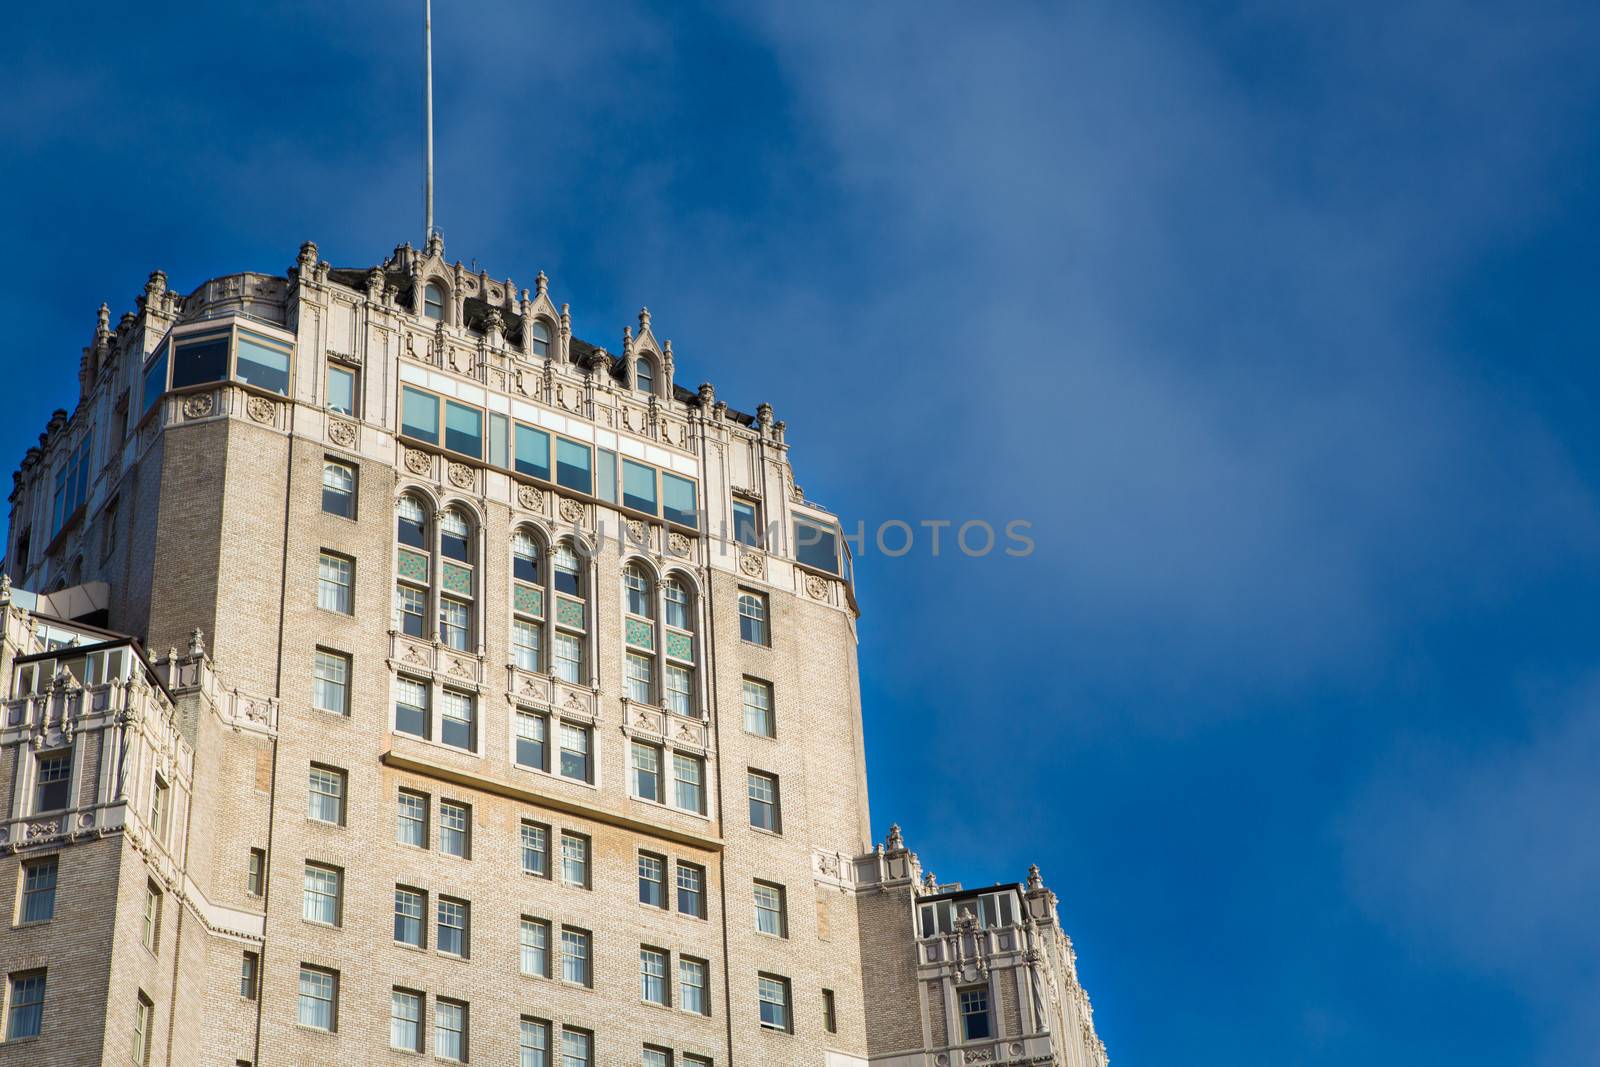 Old and classical architecture in San Francisco with a blue sky. 2012